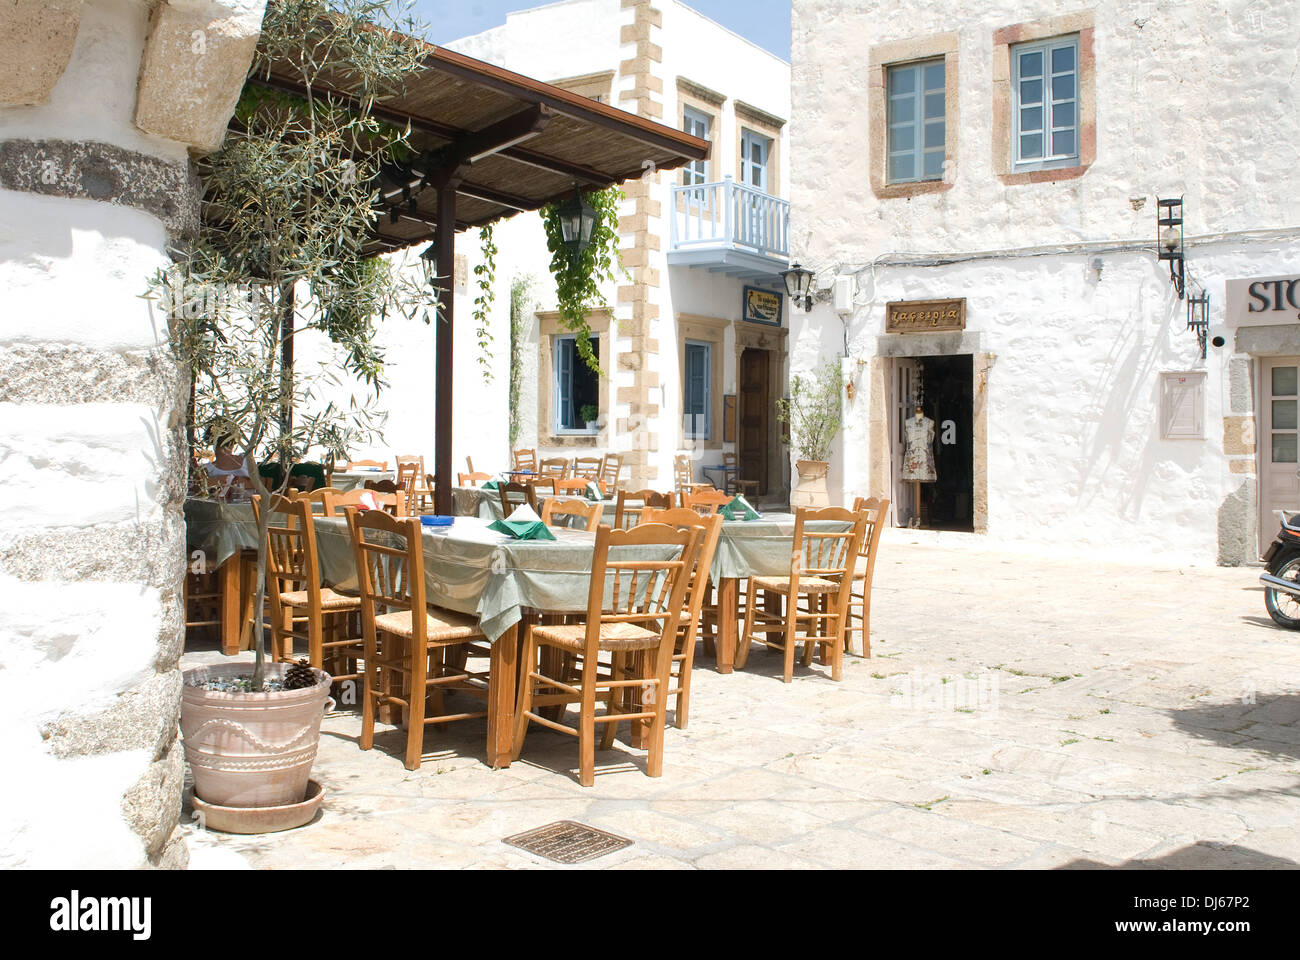 A village square view of Chora (Hora) the capital of Patmos Island, Greece Stock Photo